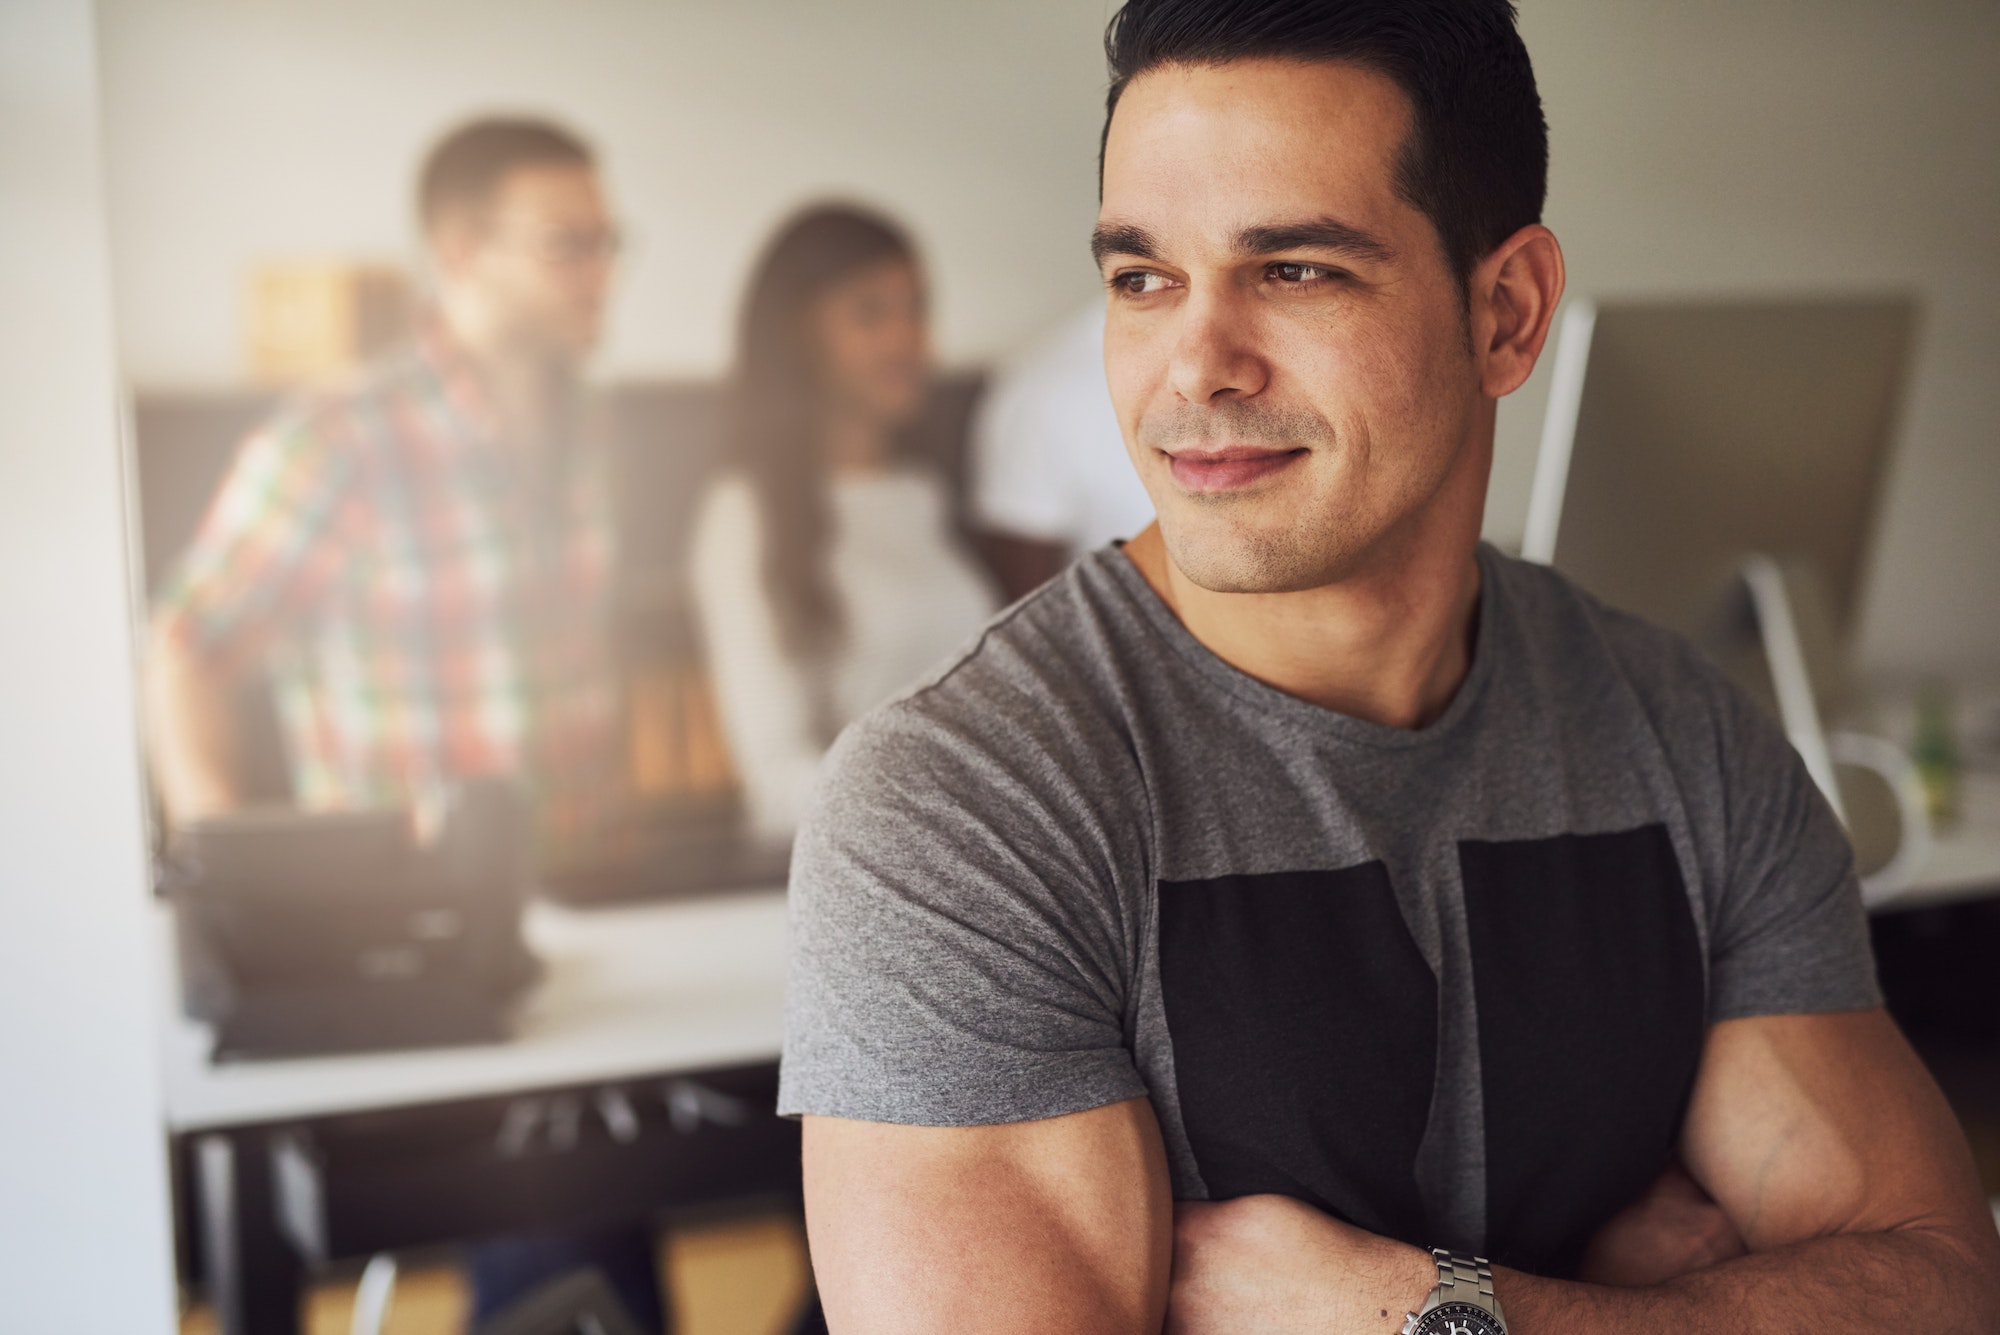 Calm muscular man in office with co-workers